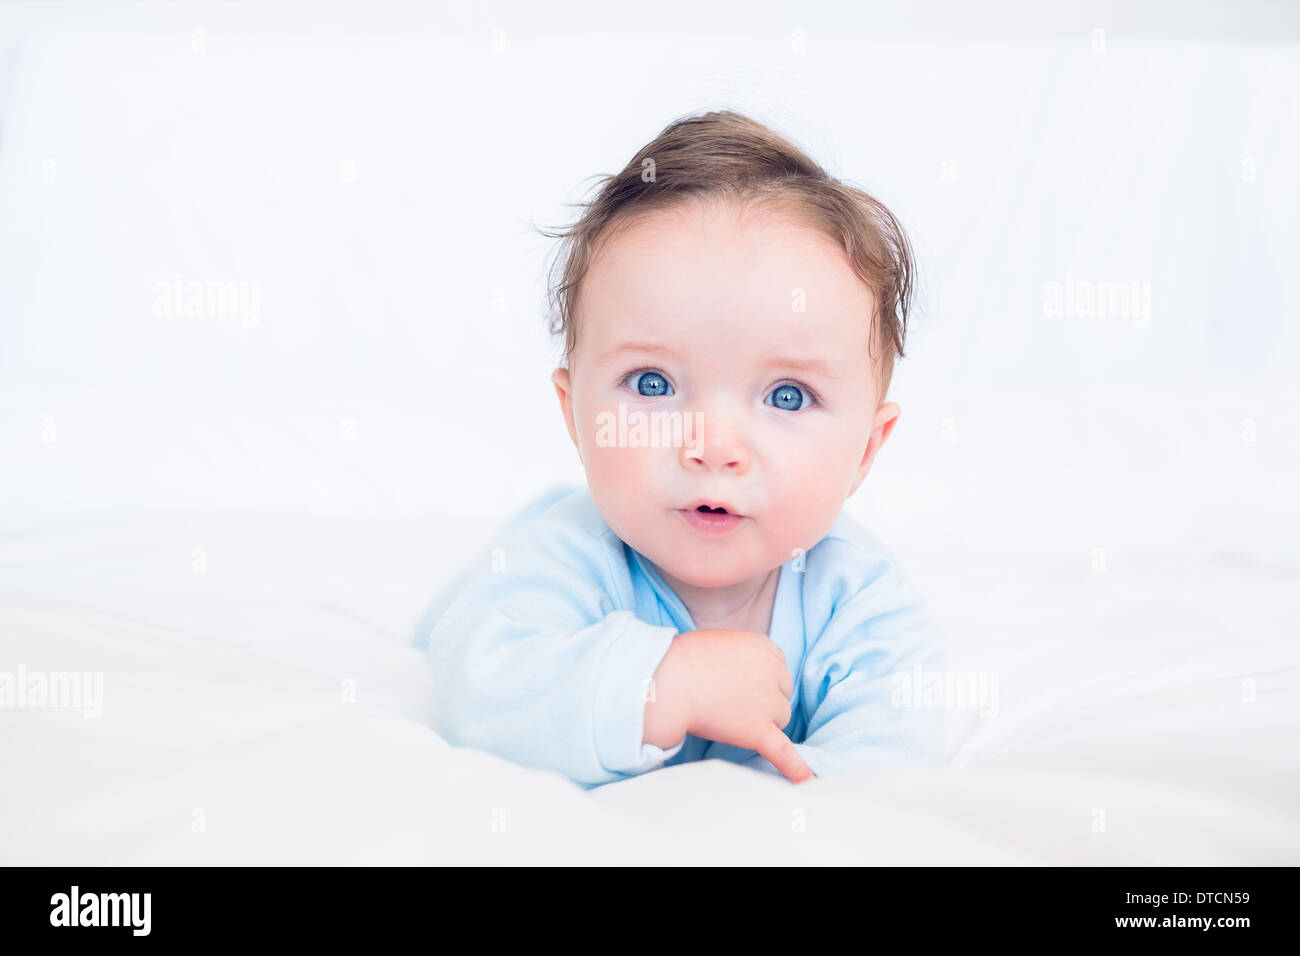 Innocent baby with blue eyes Stock Photo